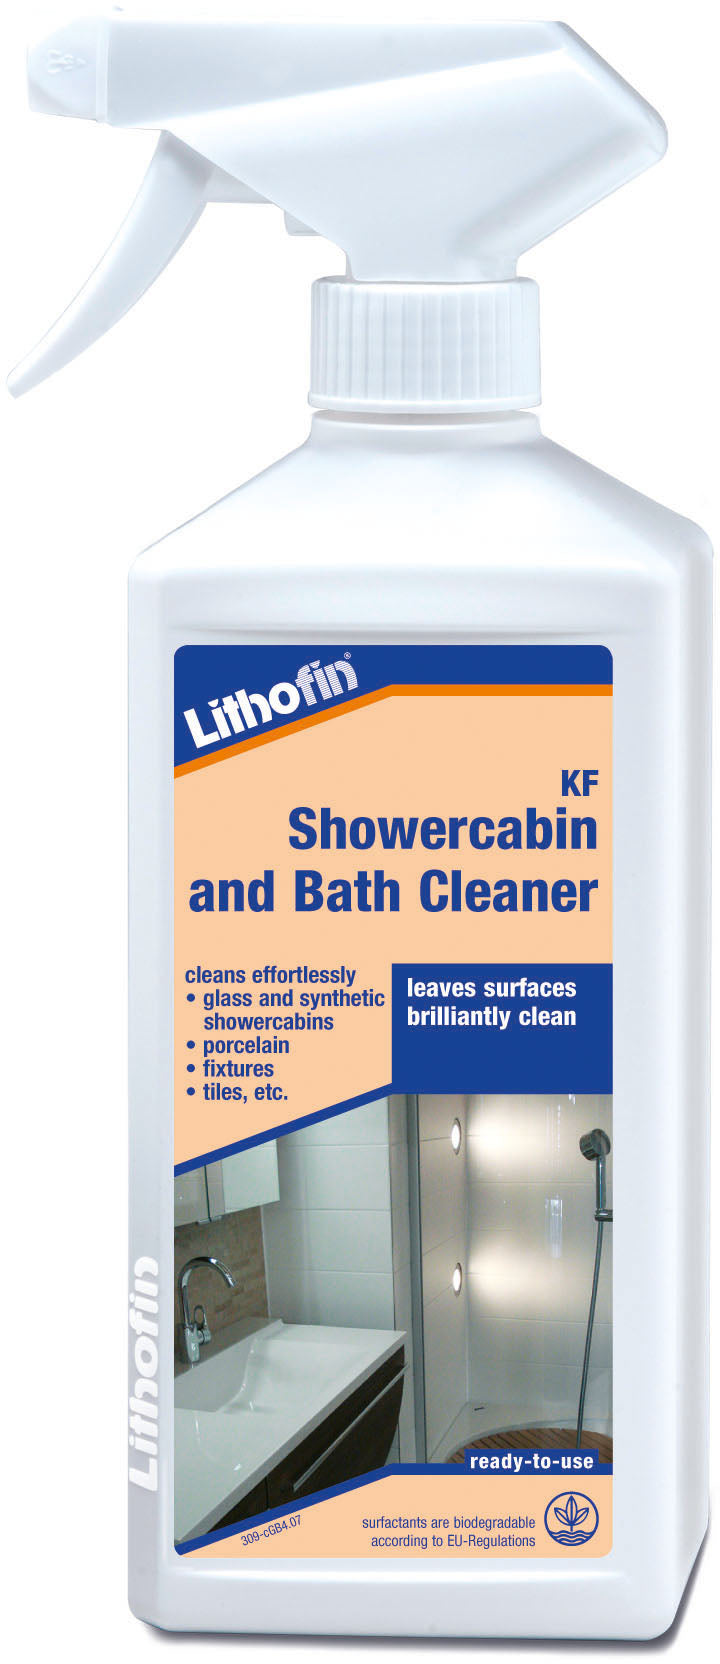 Lithofin shower cabin and bath cleaner 